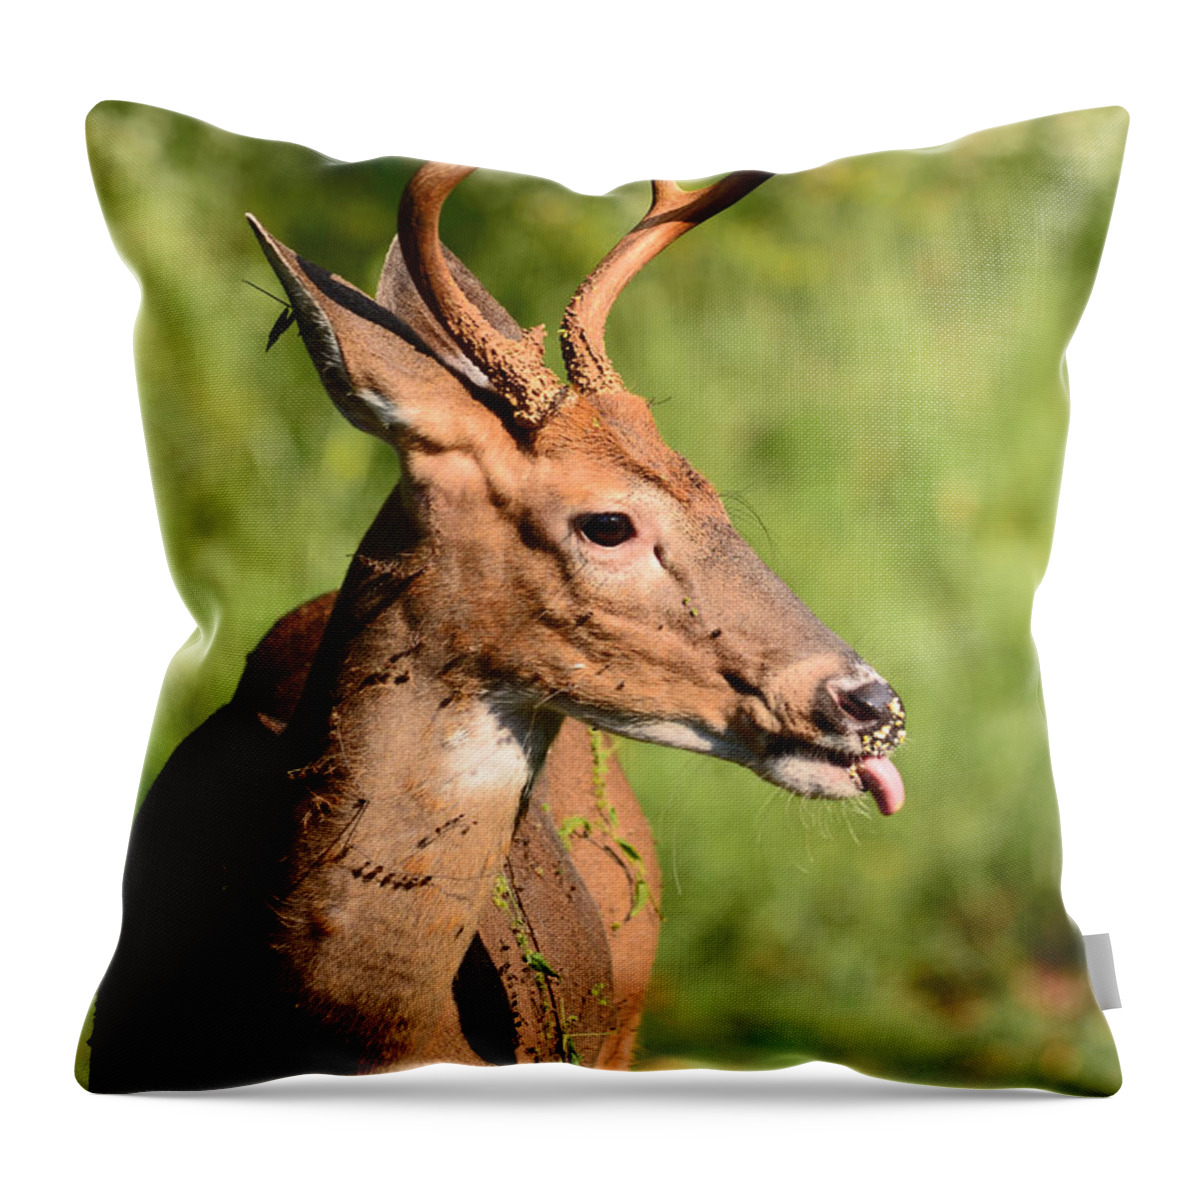 Deer Throw Pillow featuring the photograph What A Mess by Lori Tambakis